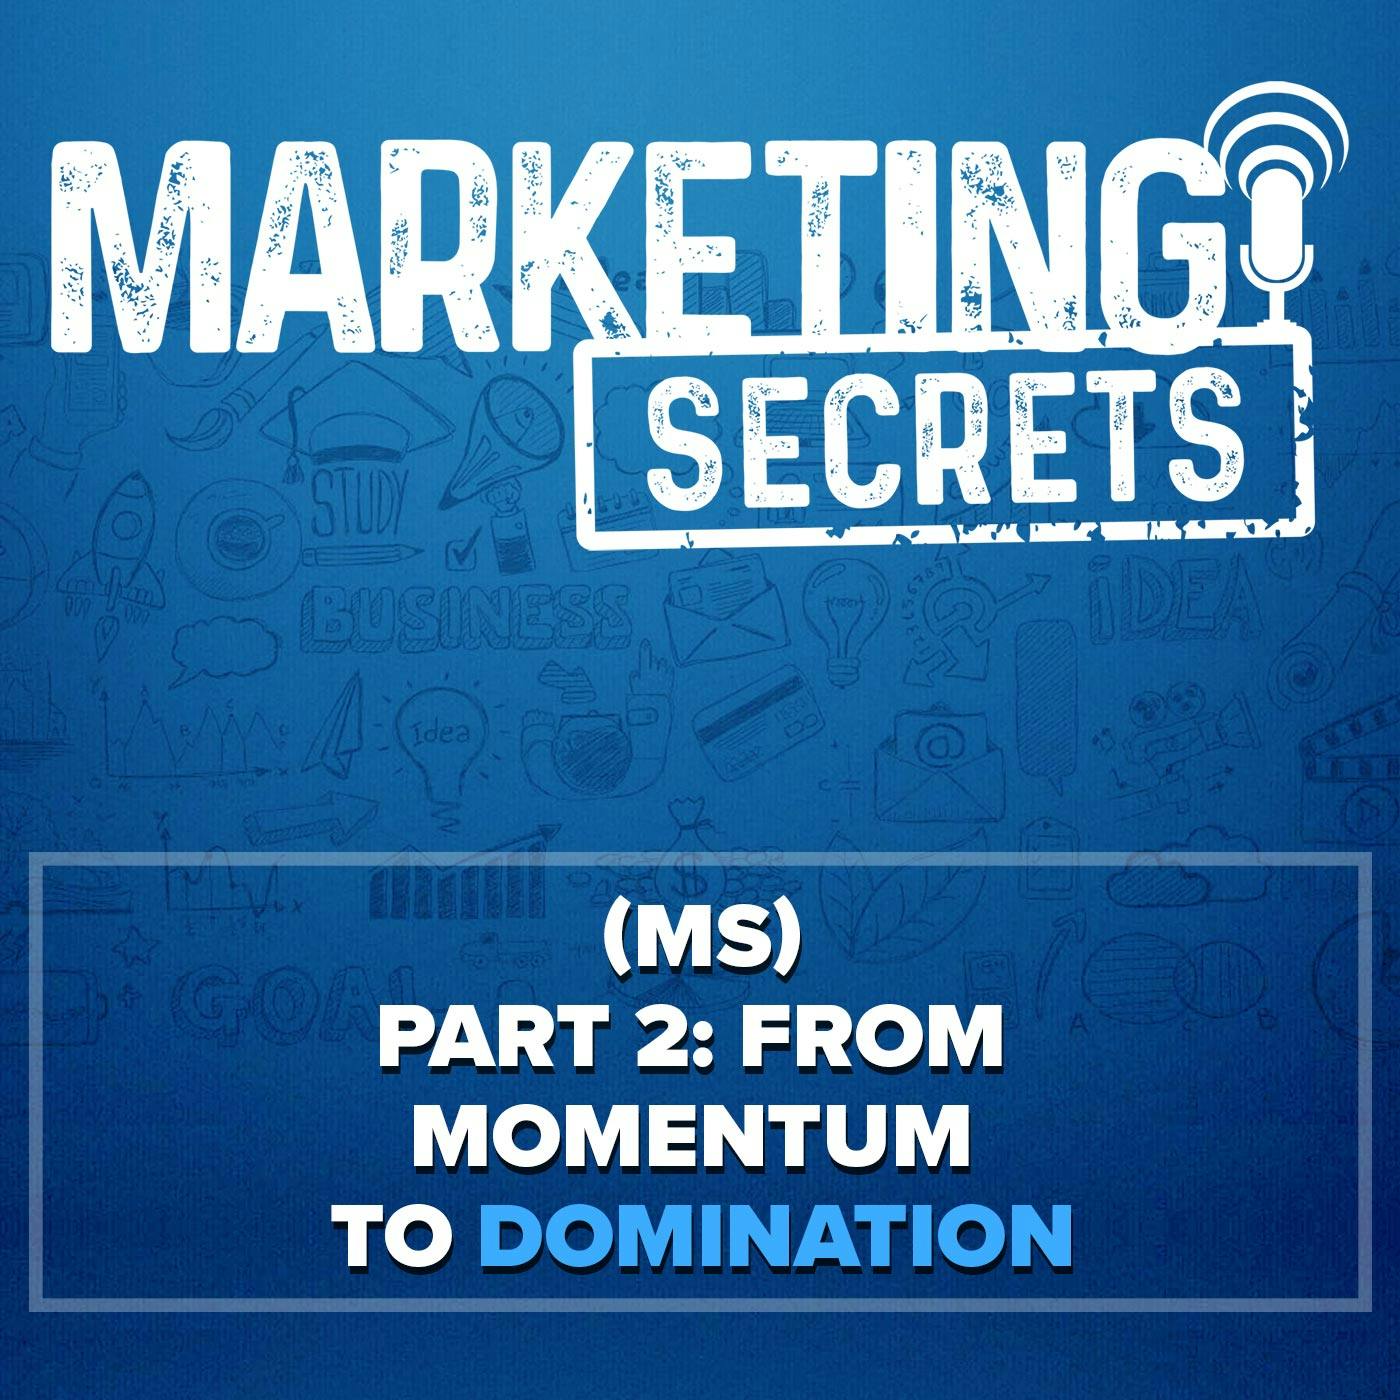 (MS) Part 2: From Momentum To Domination